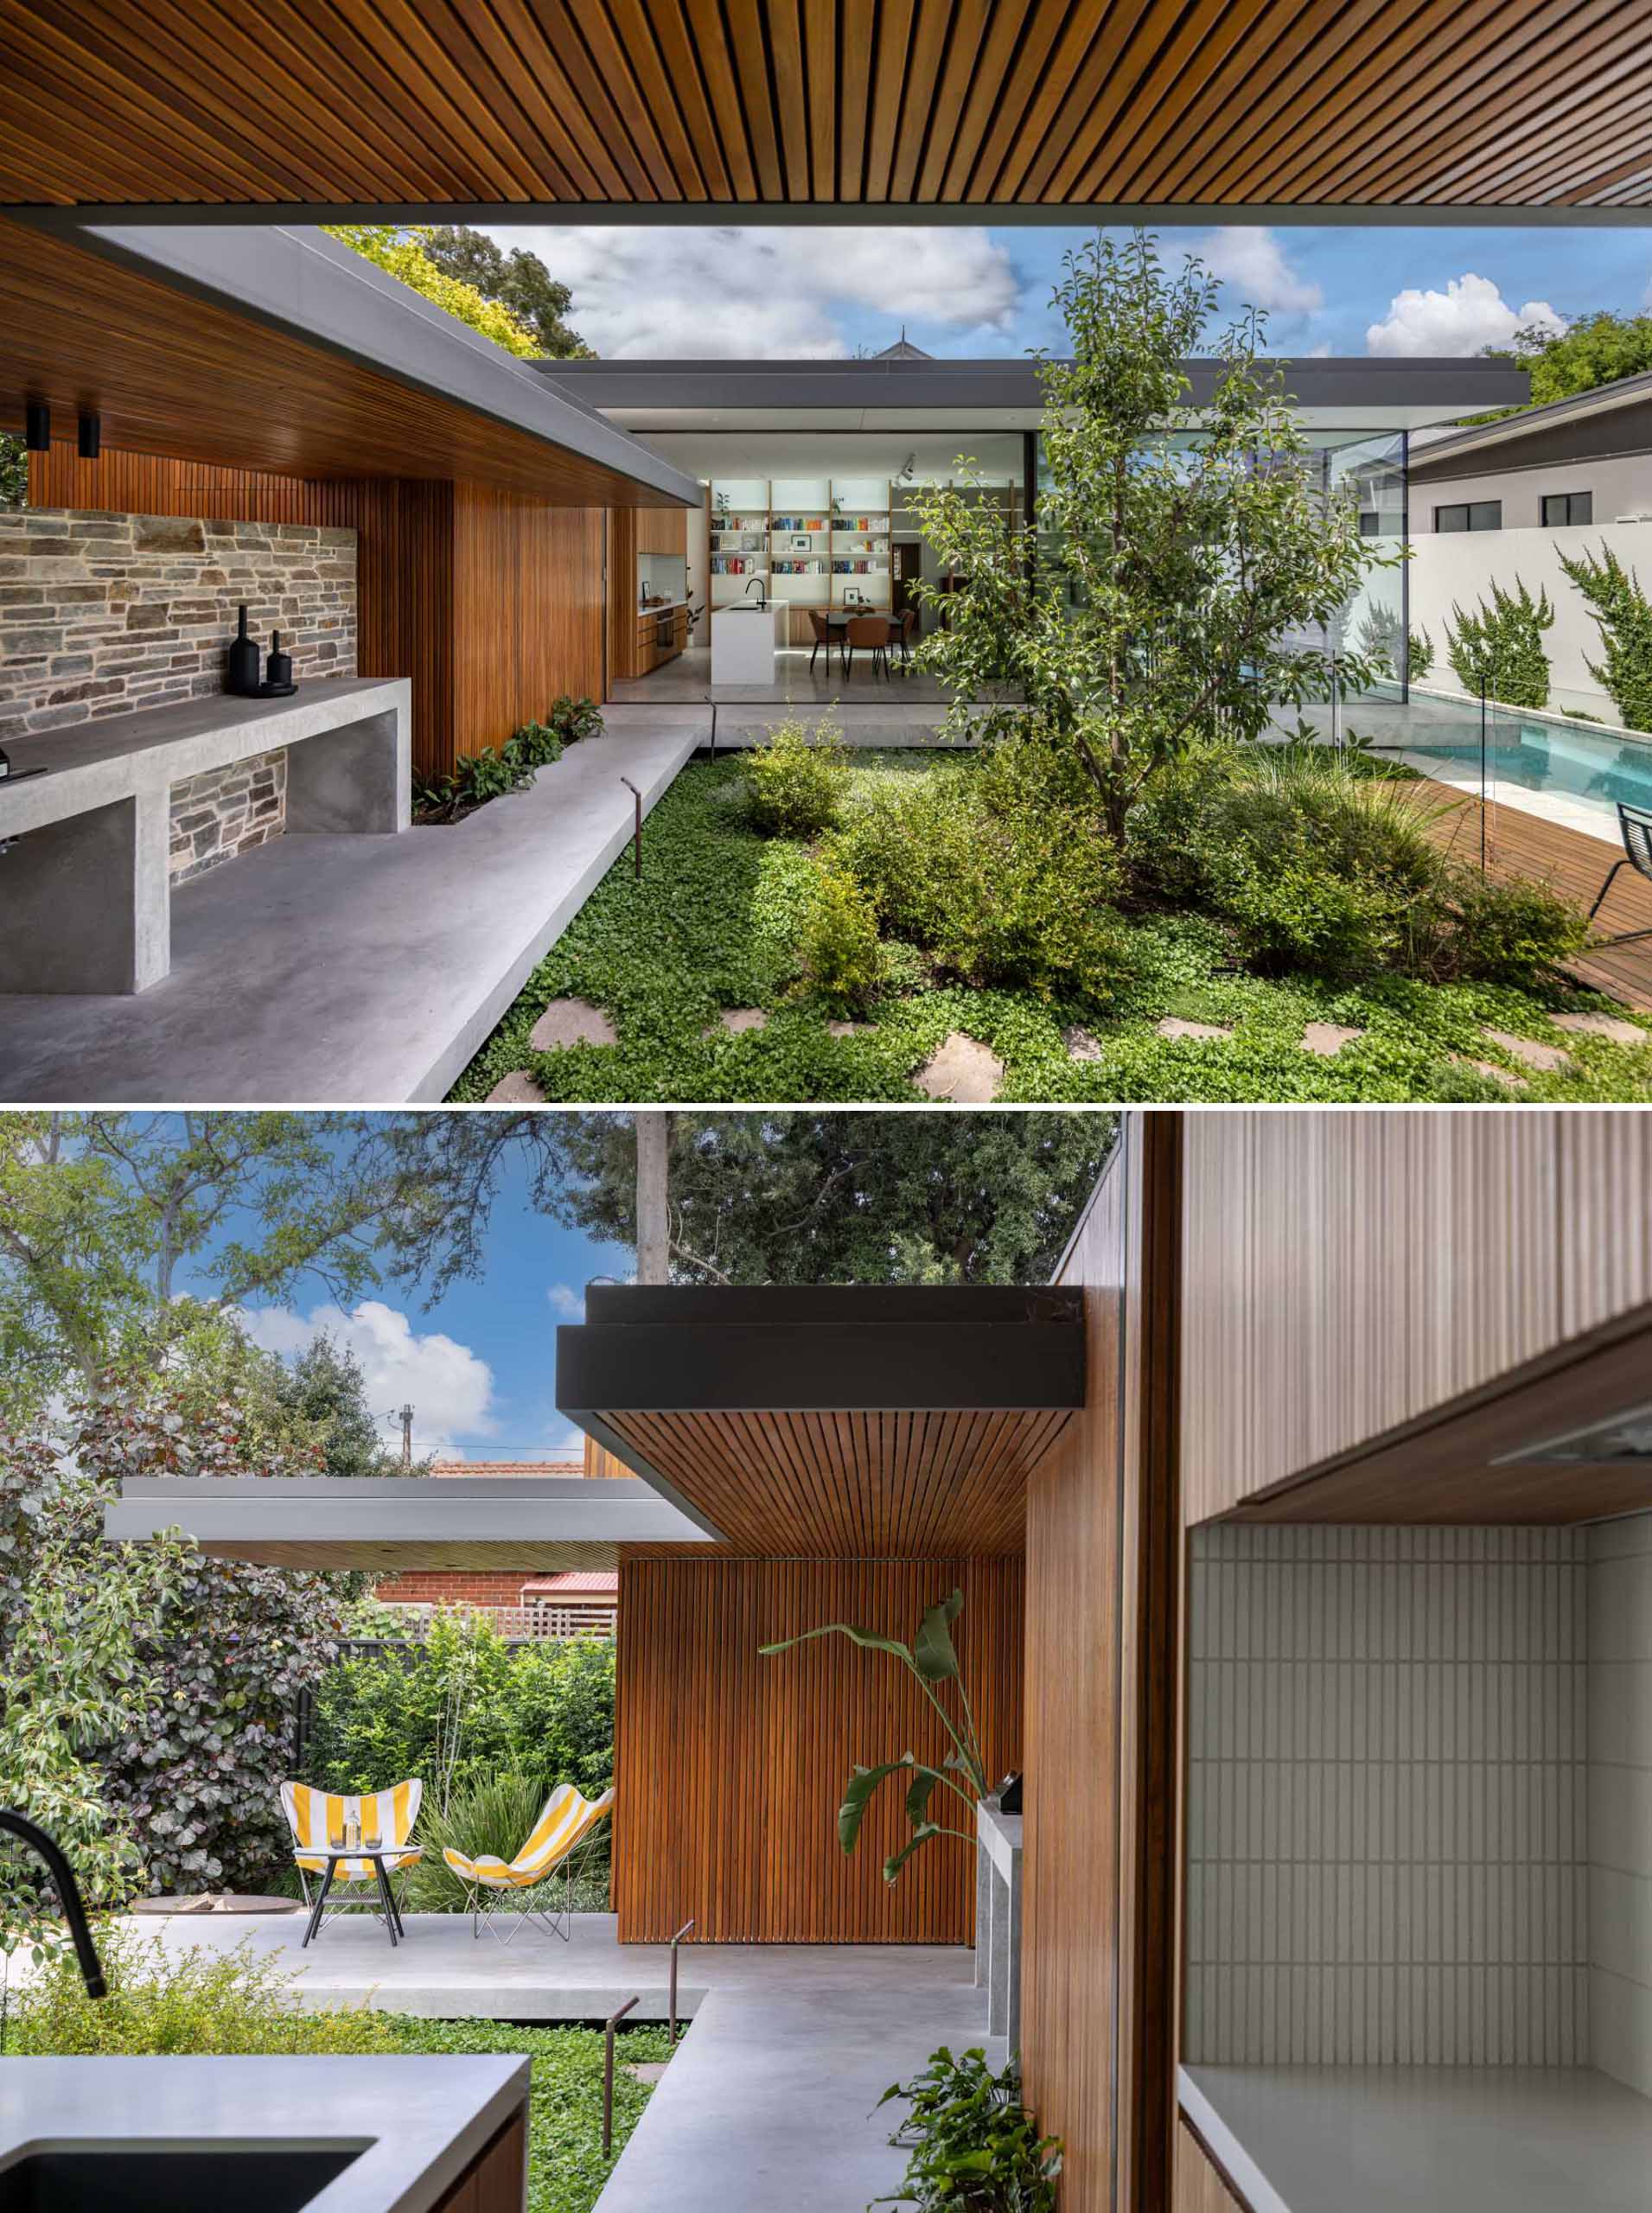 A stone wall alongside a path, includes an area for an outdoor kitchen with a bbq.